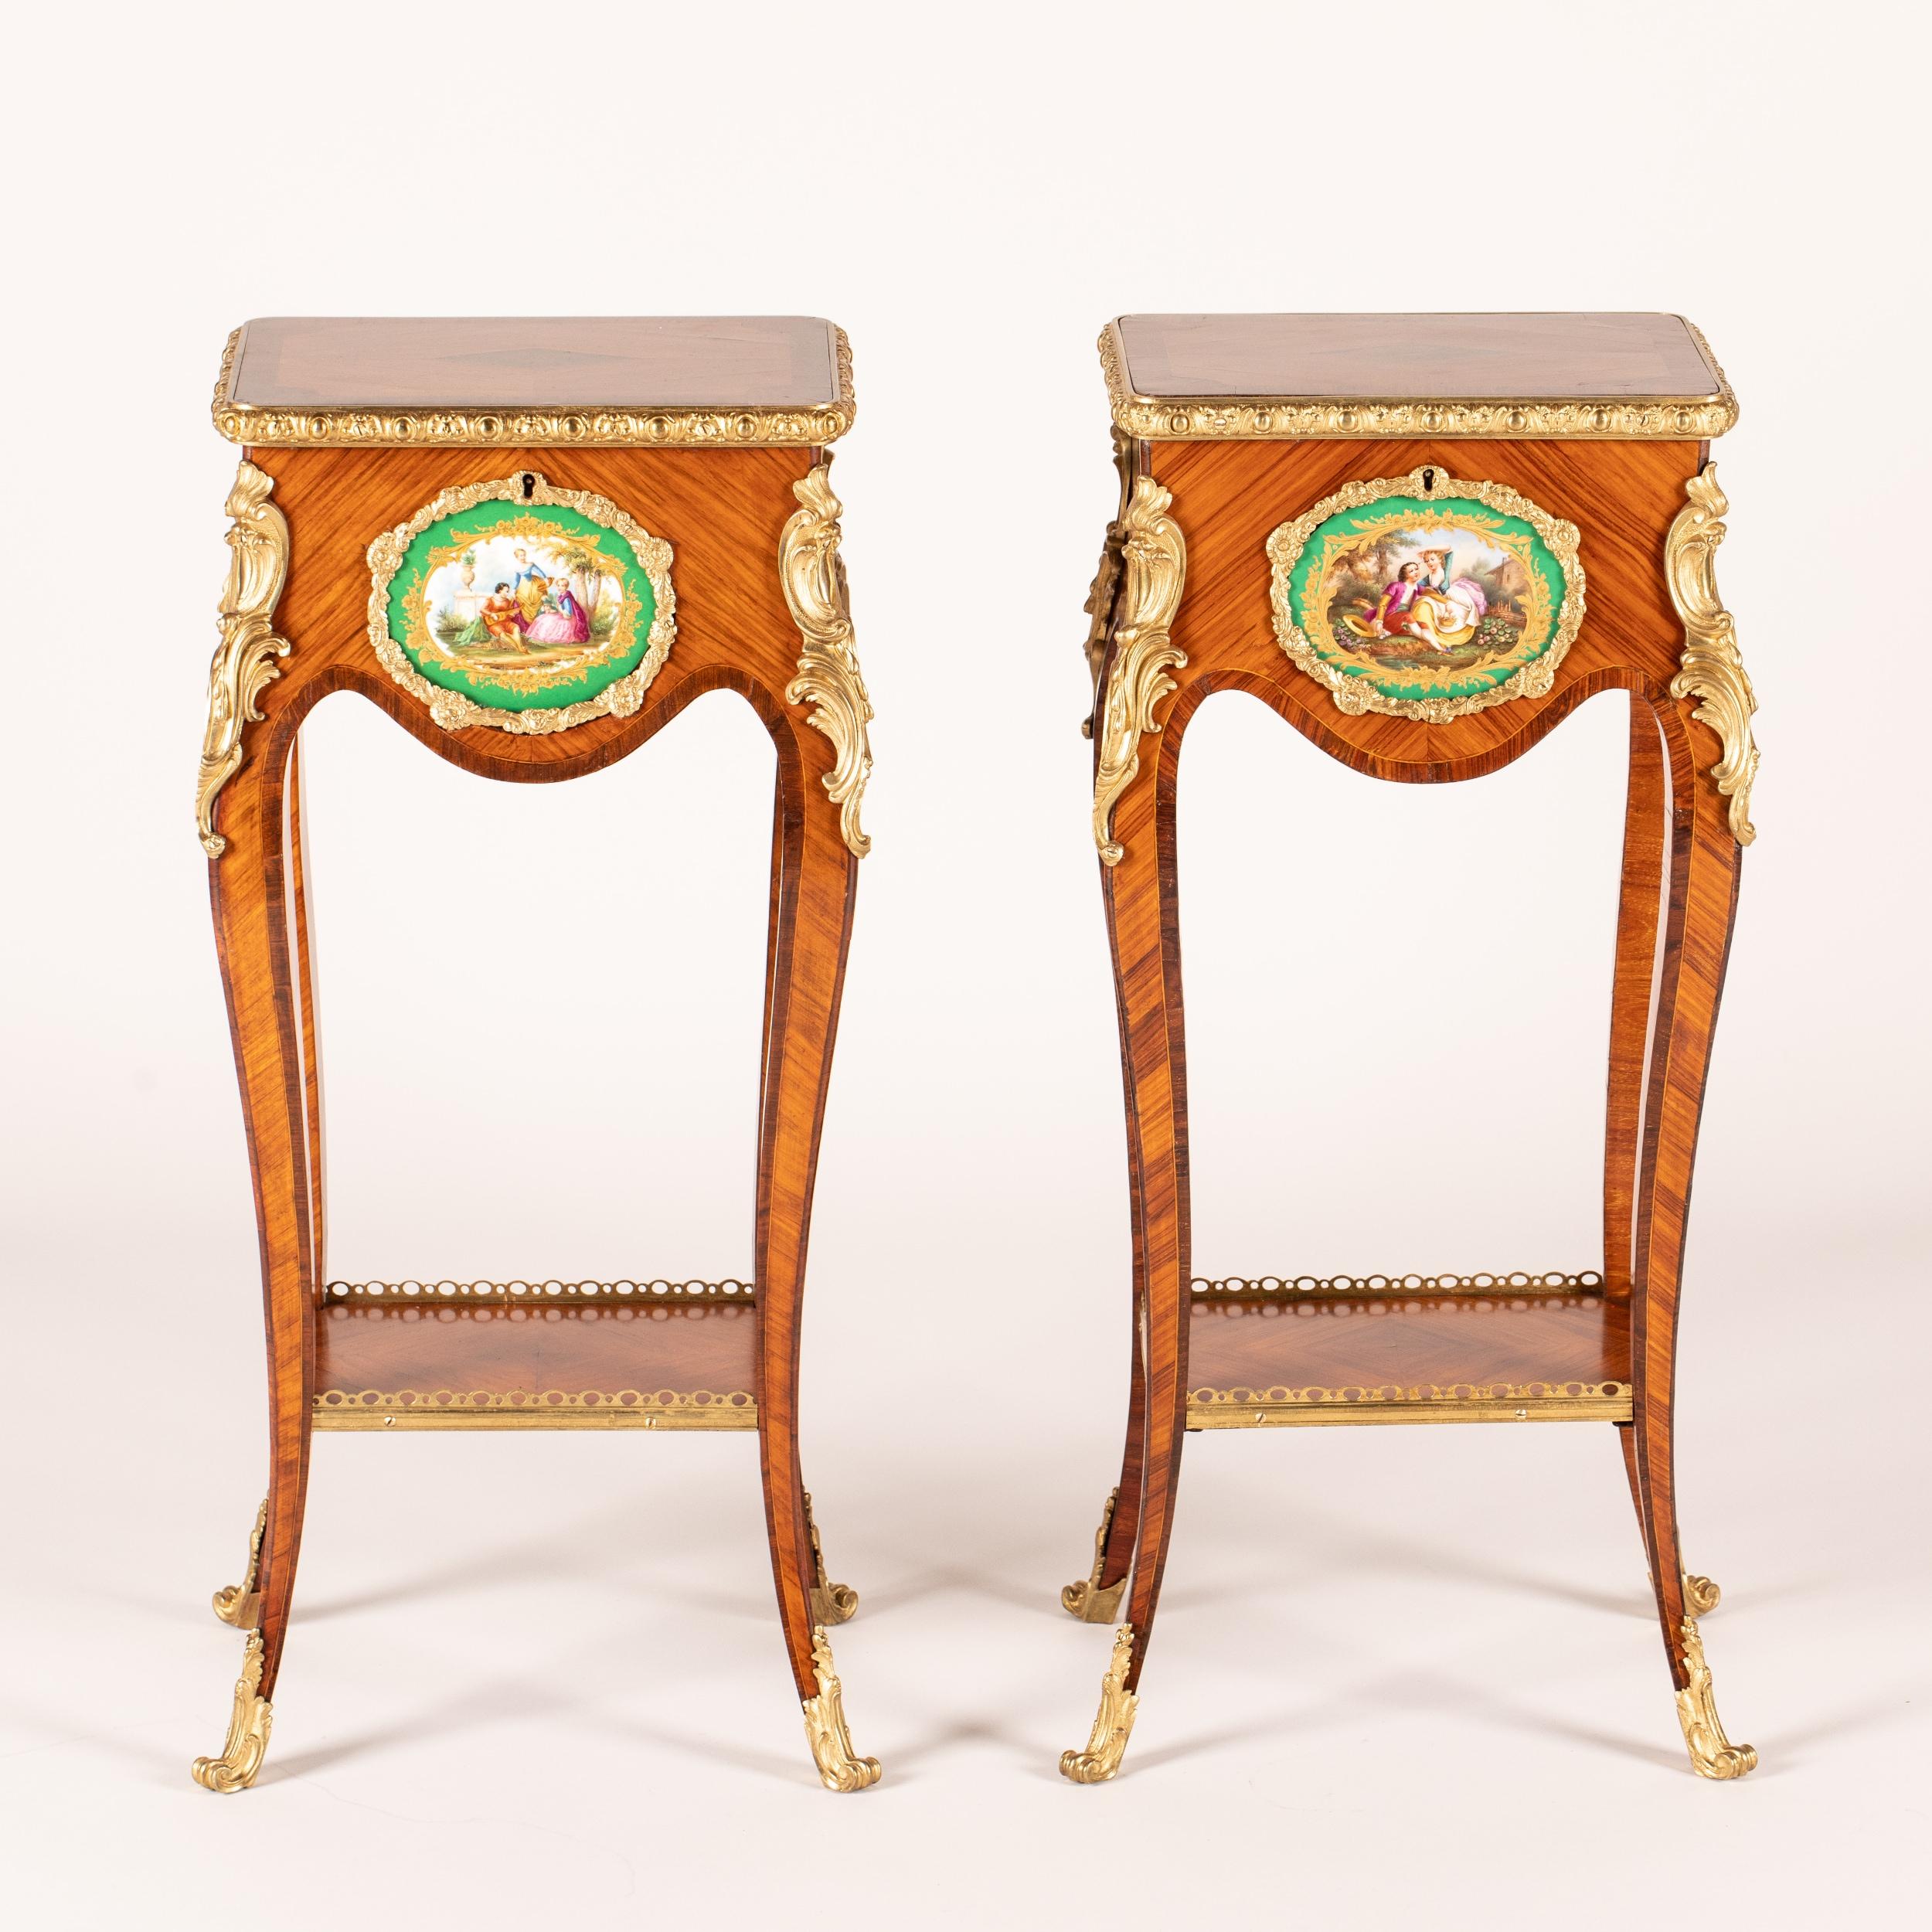 A Pair of Occasional tables in the Louis XV Transitional taste

Constructed in tulipwood with kingwood employed in the cross banding and inlay work alongside boxwood stringing, and dressed with gilt bronze mounts; of rectangular form, with